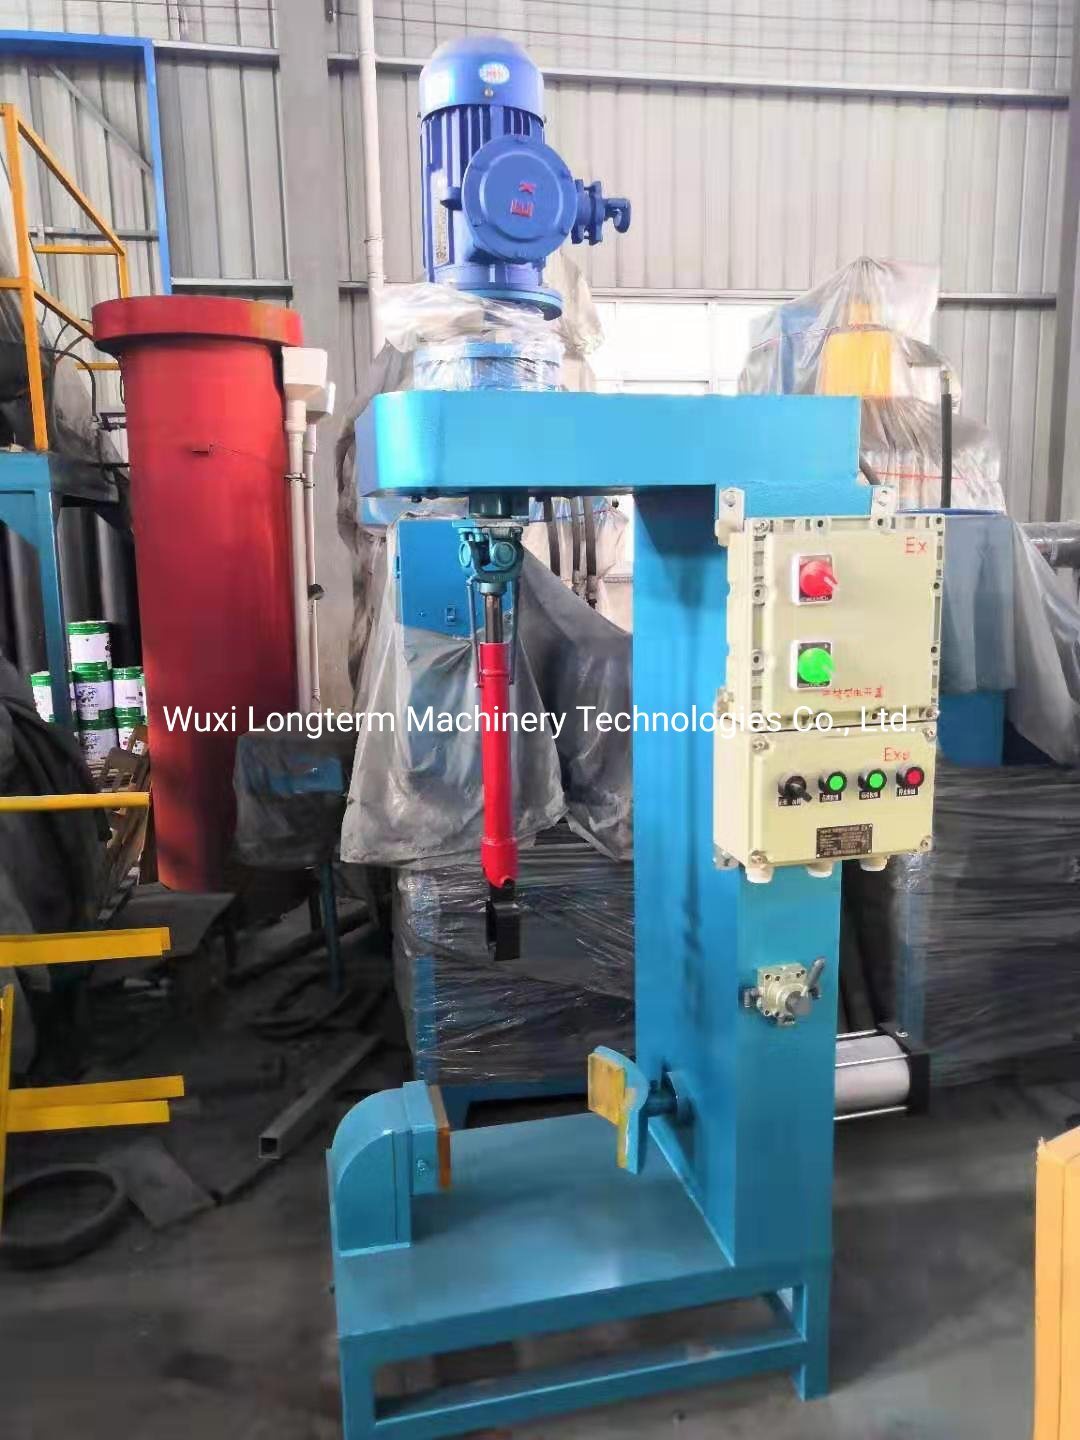 Chinese Top Valve Mounting Machine for Different Sizes